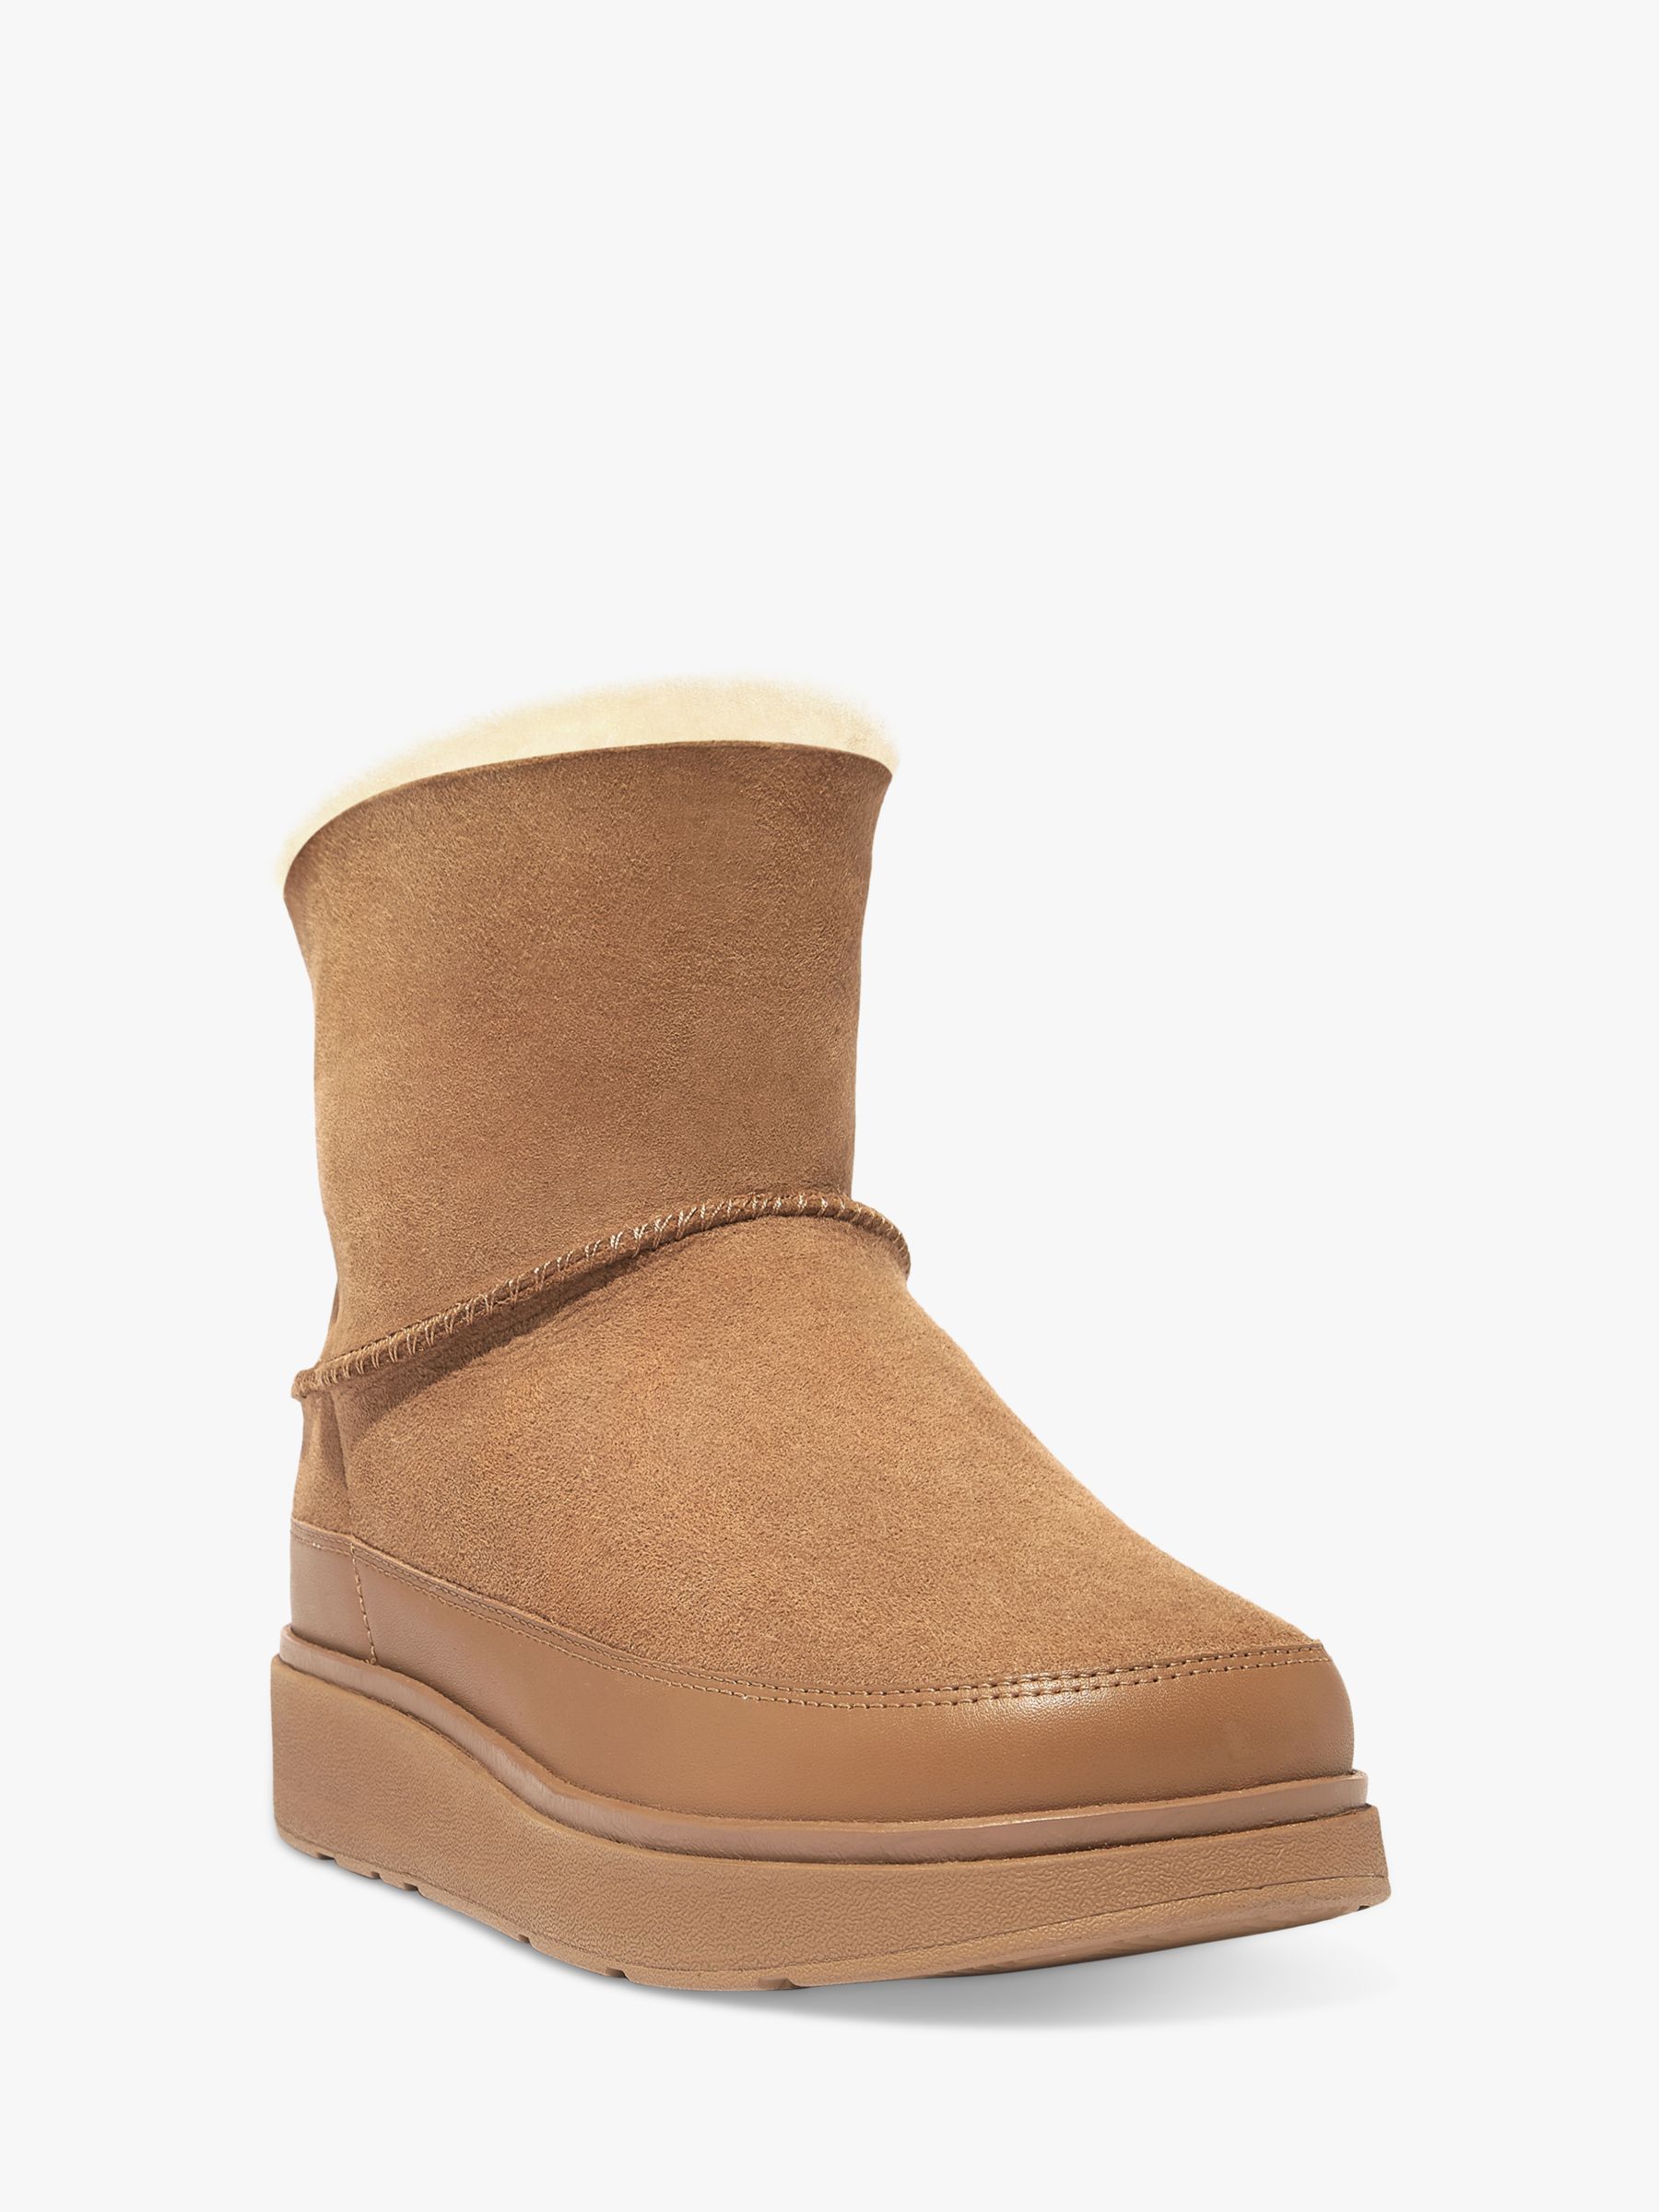 Buy FitFlop Sheepskin Ankle Boots Online at johnlewis.com